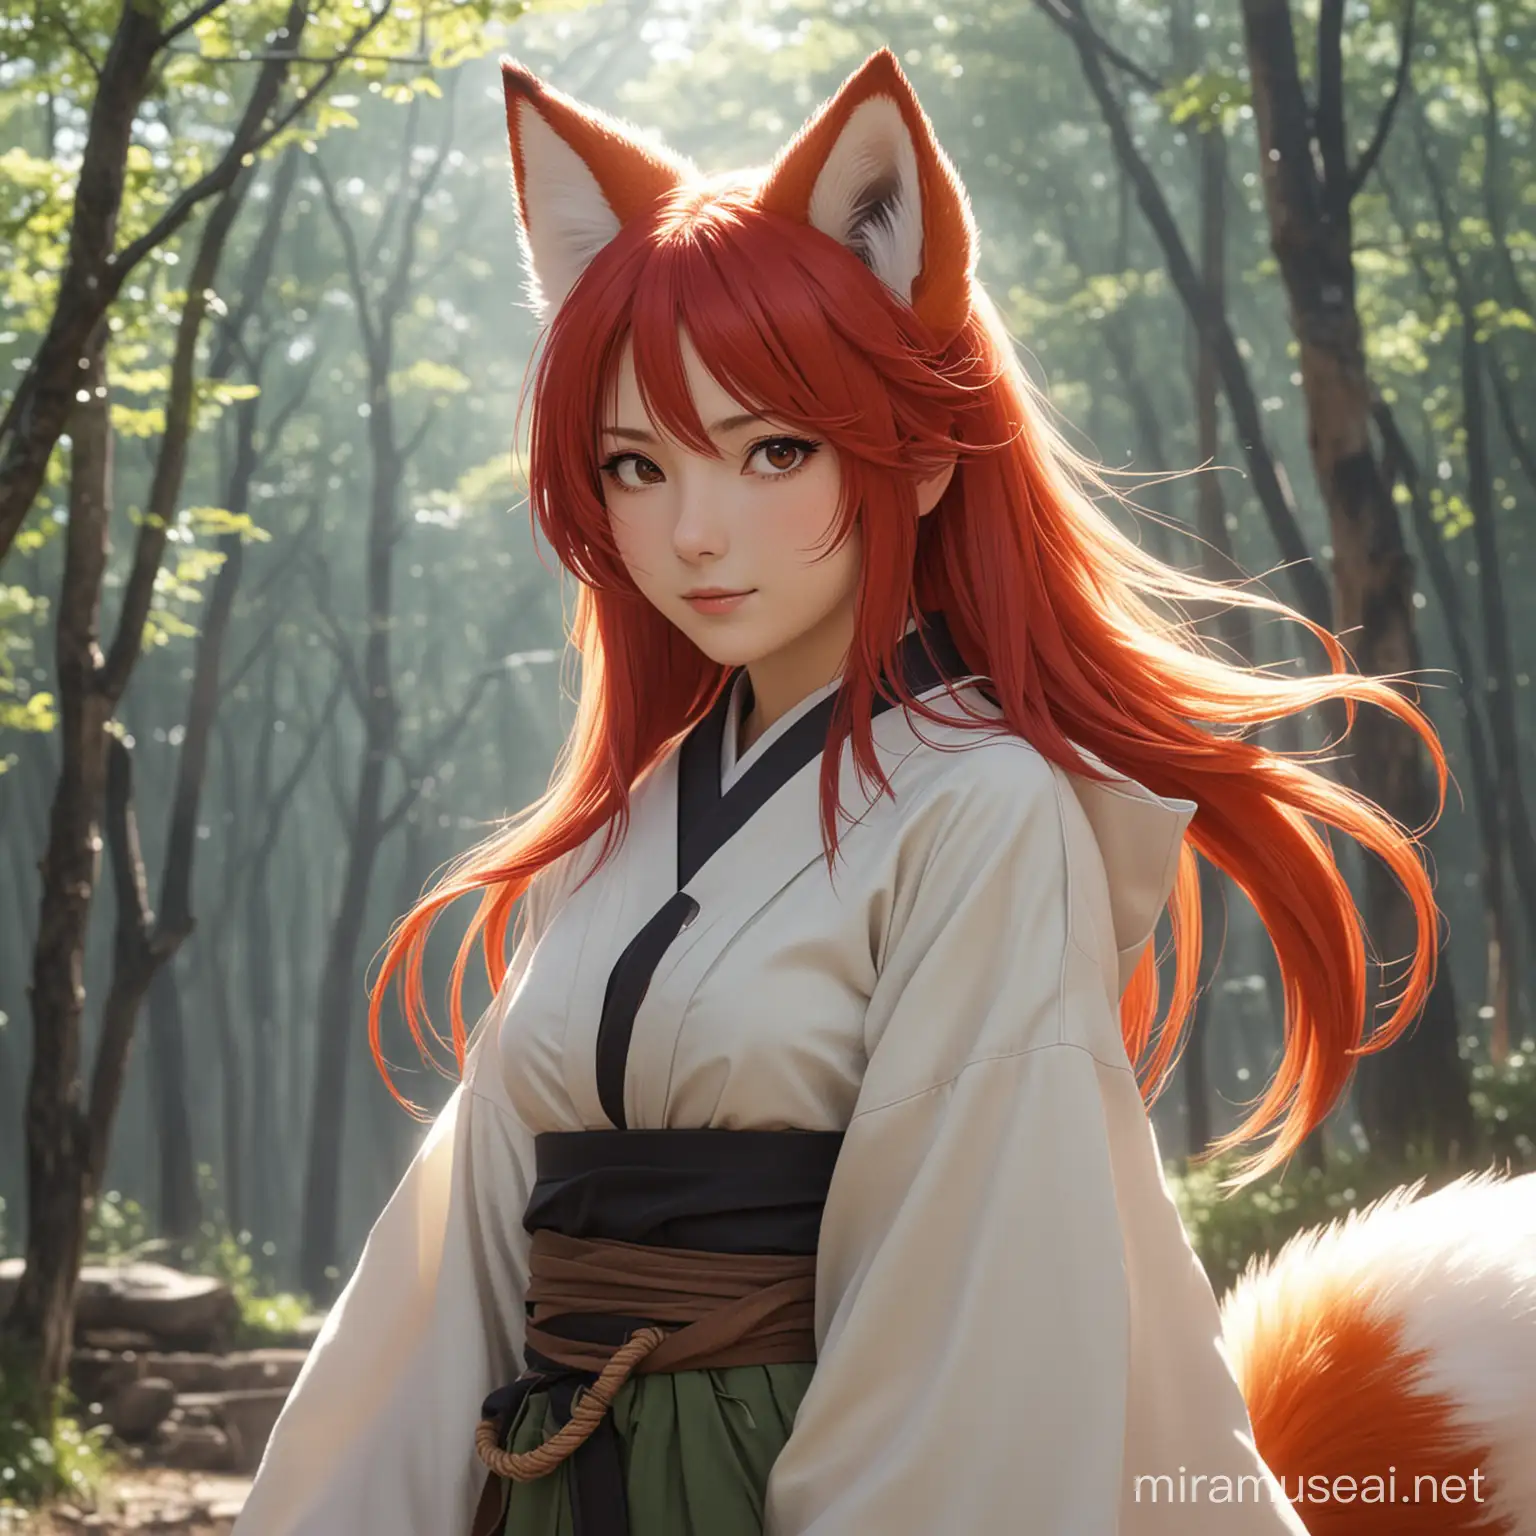 Mystical Fox Spirit with Red Hair and Traditional Yutaka